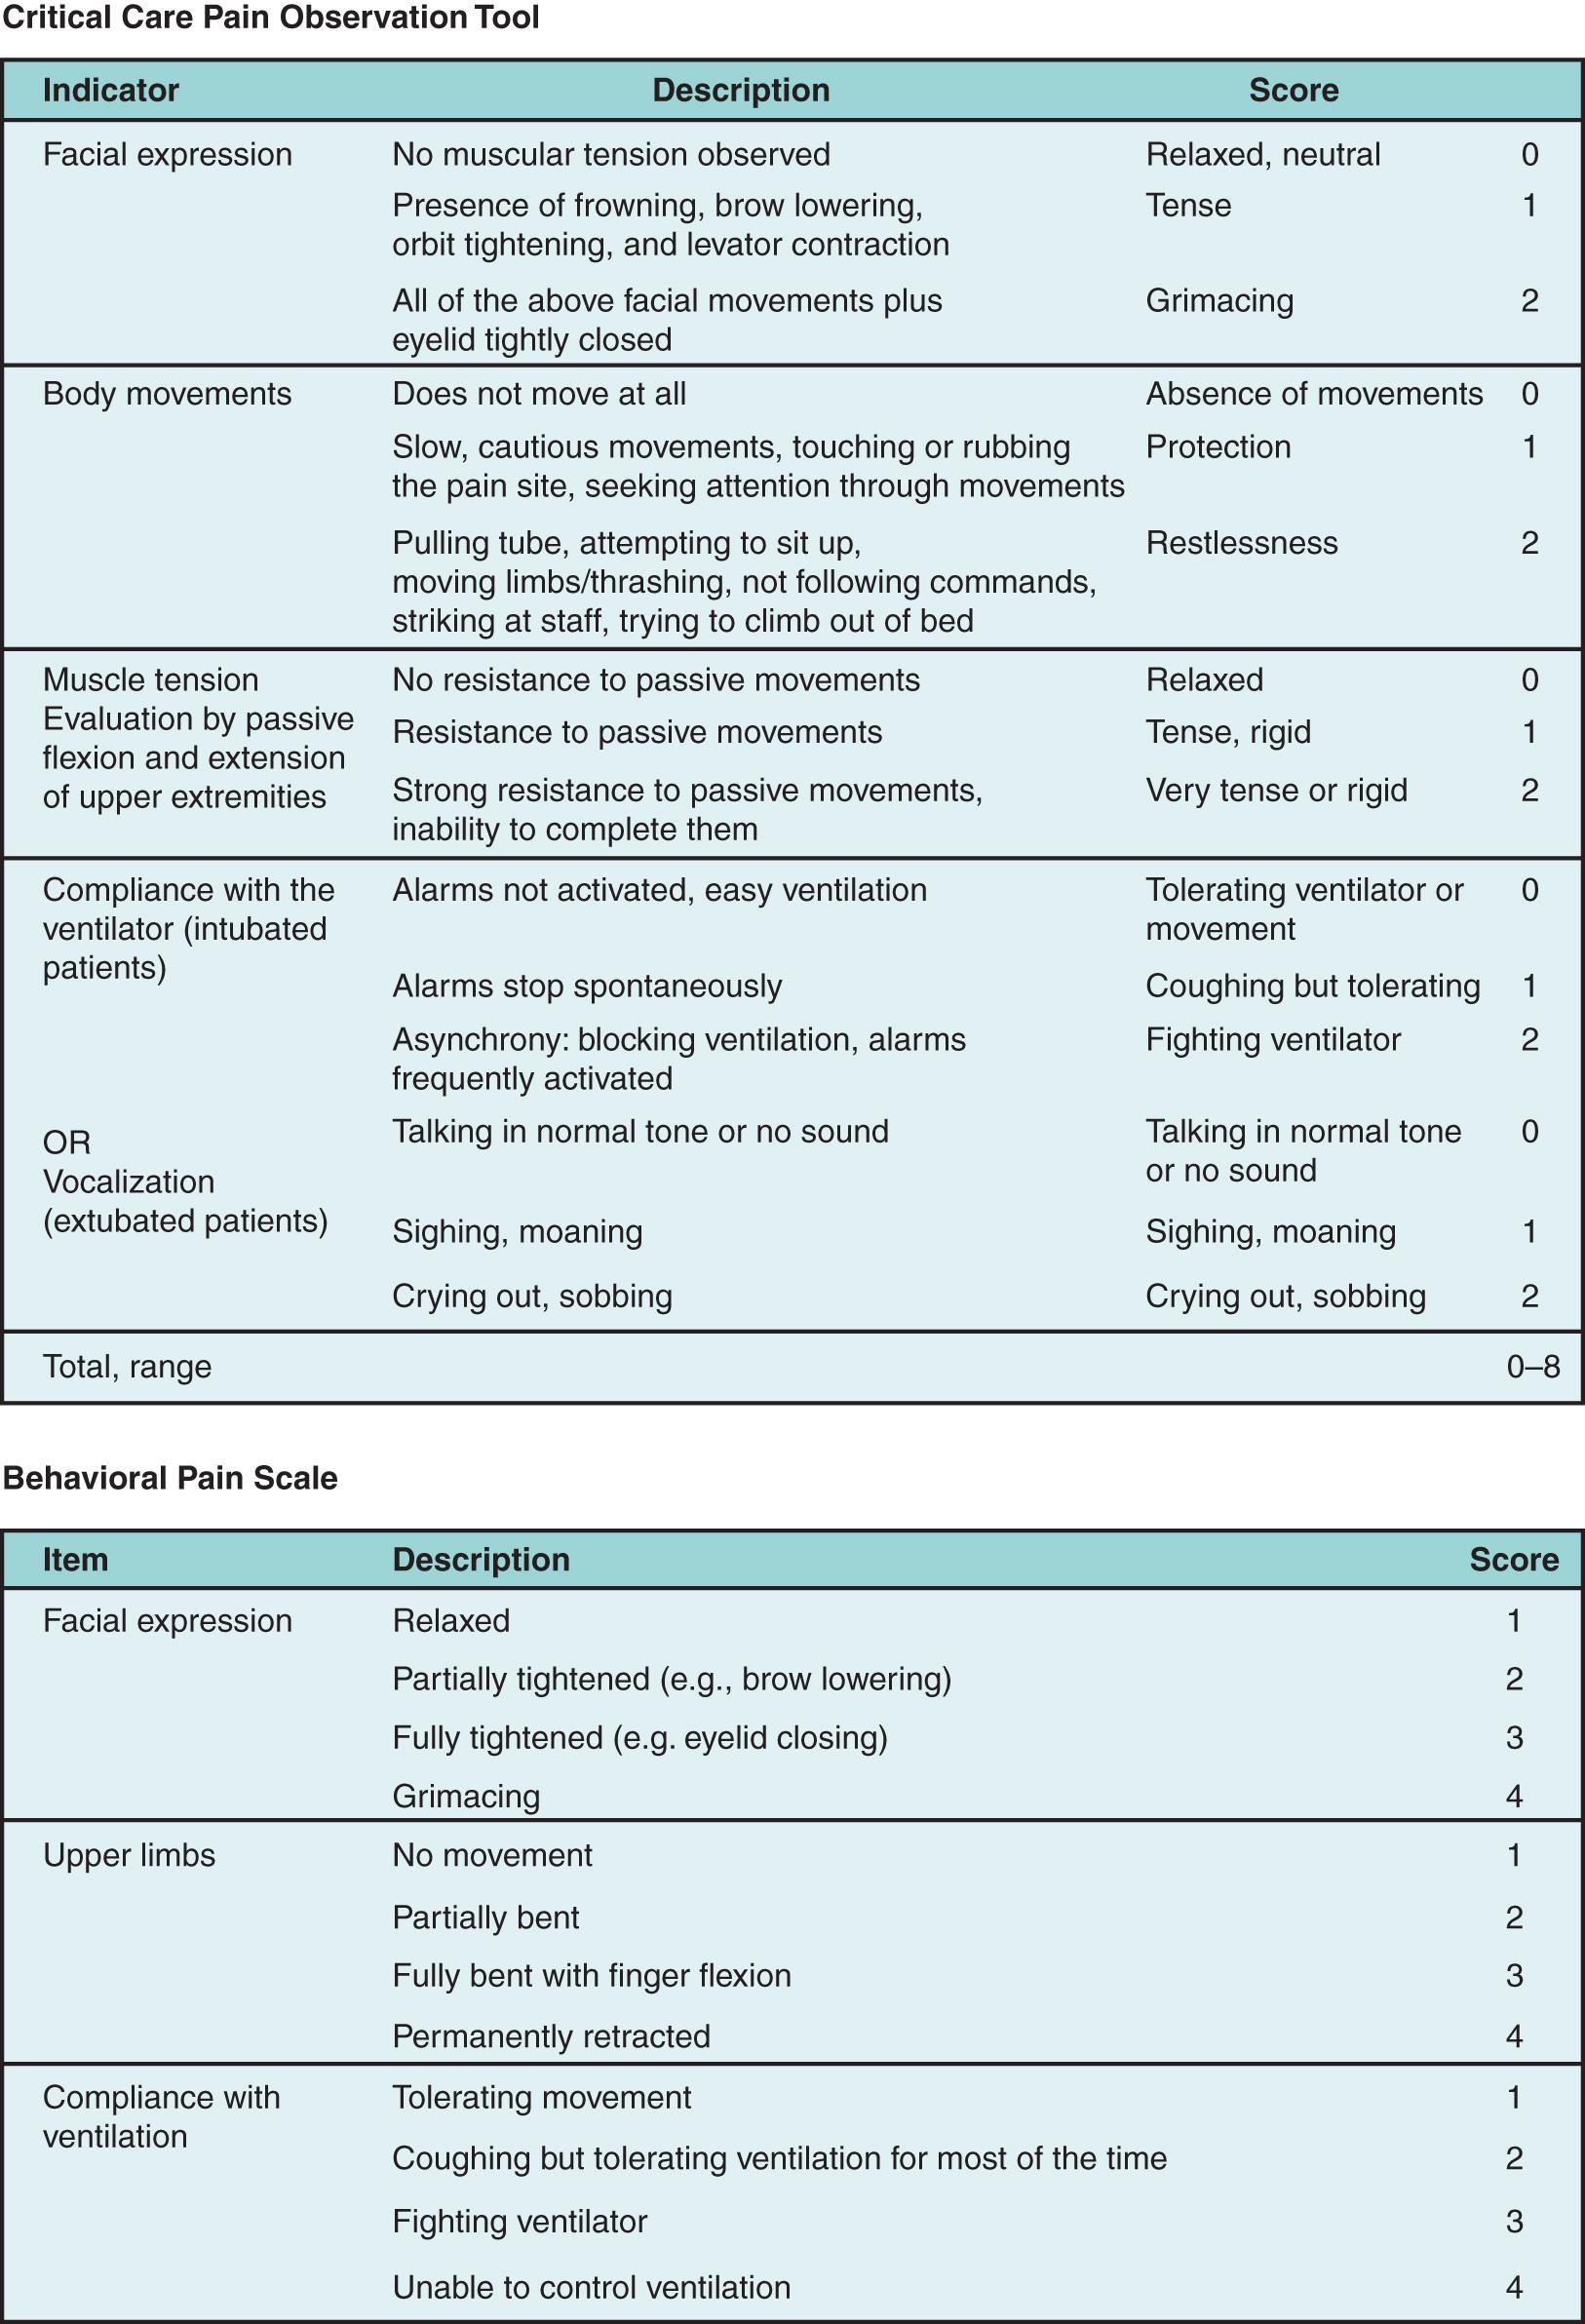 Fig. 3.2, Critical Care Pain Observation Tool (CPOT) and Behavioral Pain Scale (BPS) are two commonly used tools for monitoring pain in those patients that are unable to self-report.